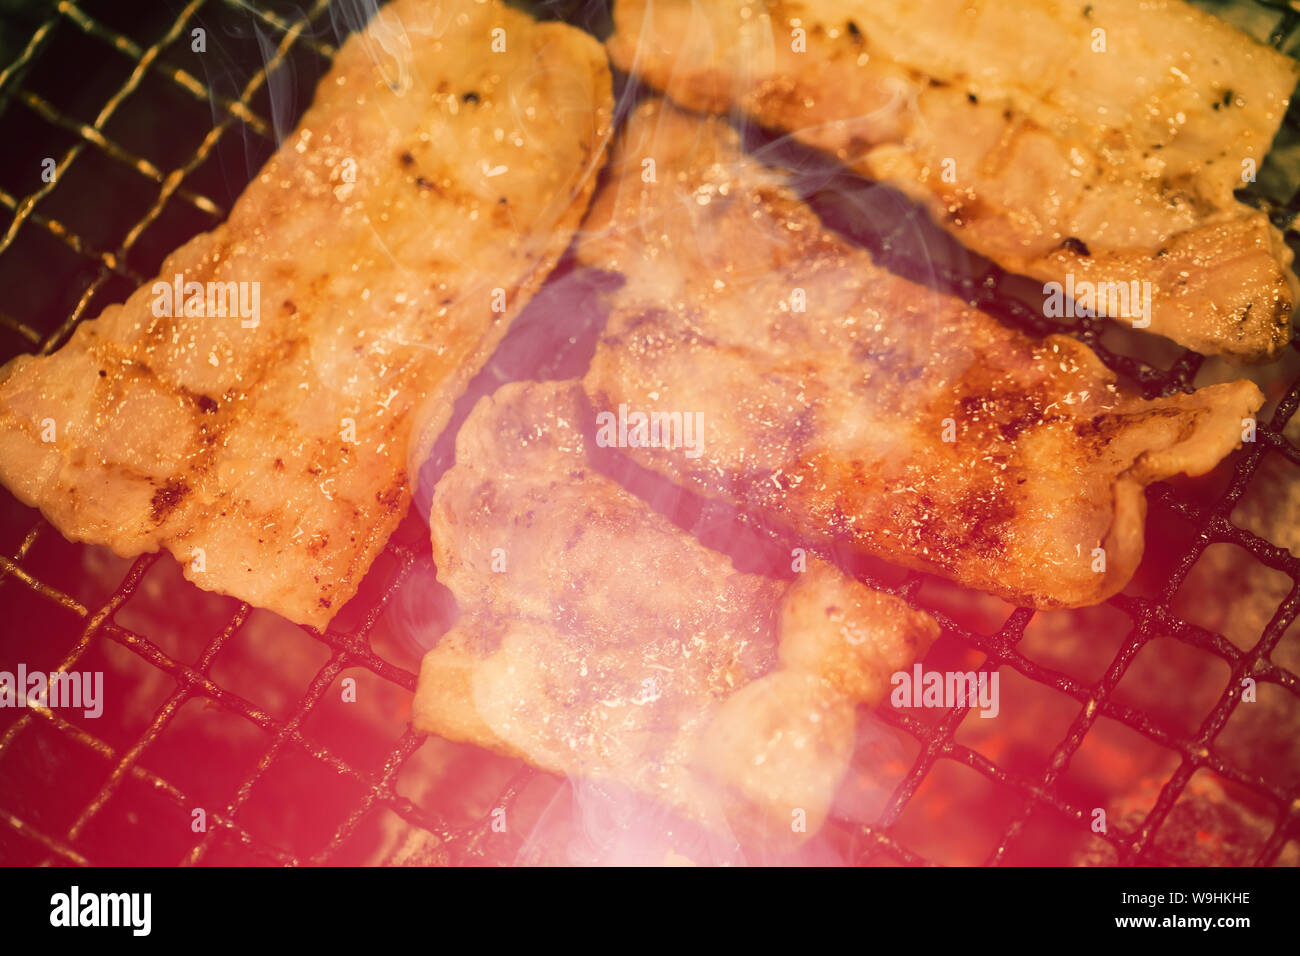 danger food burnt charred meat risk of cancer from heterocyclic amines (HCAs) and polycyclic aromatic hydrocarbons (PAHs). unhealthy food concept Stock Photo